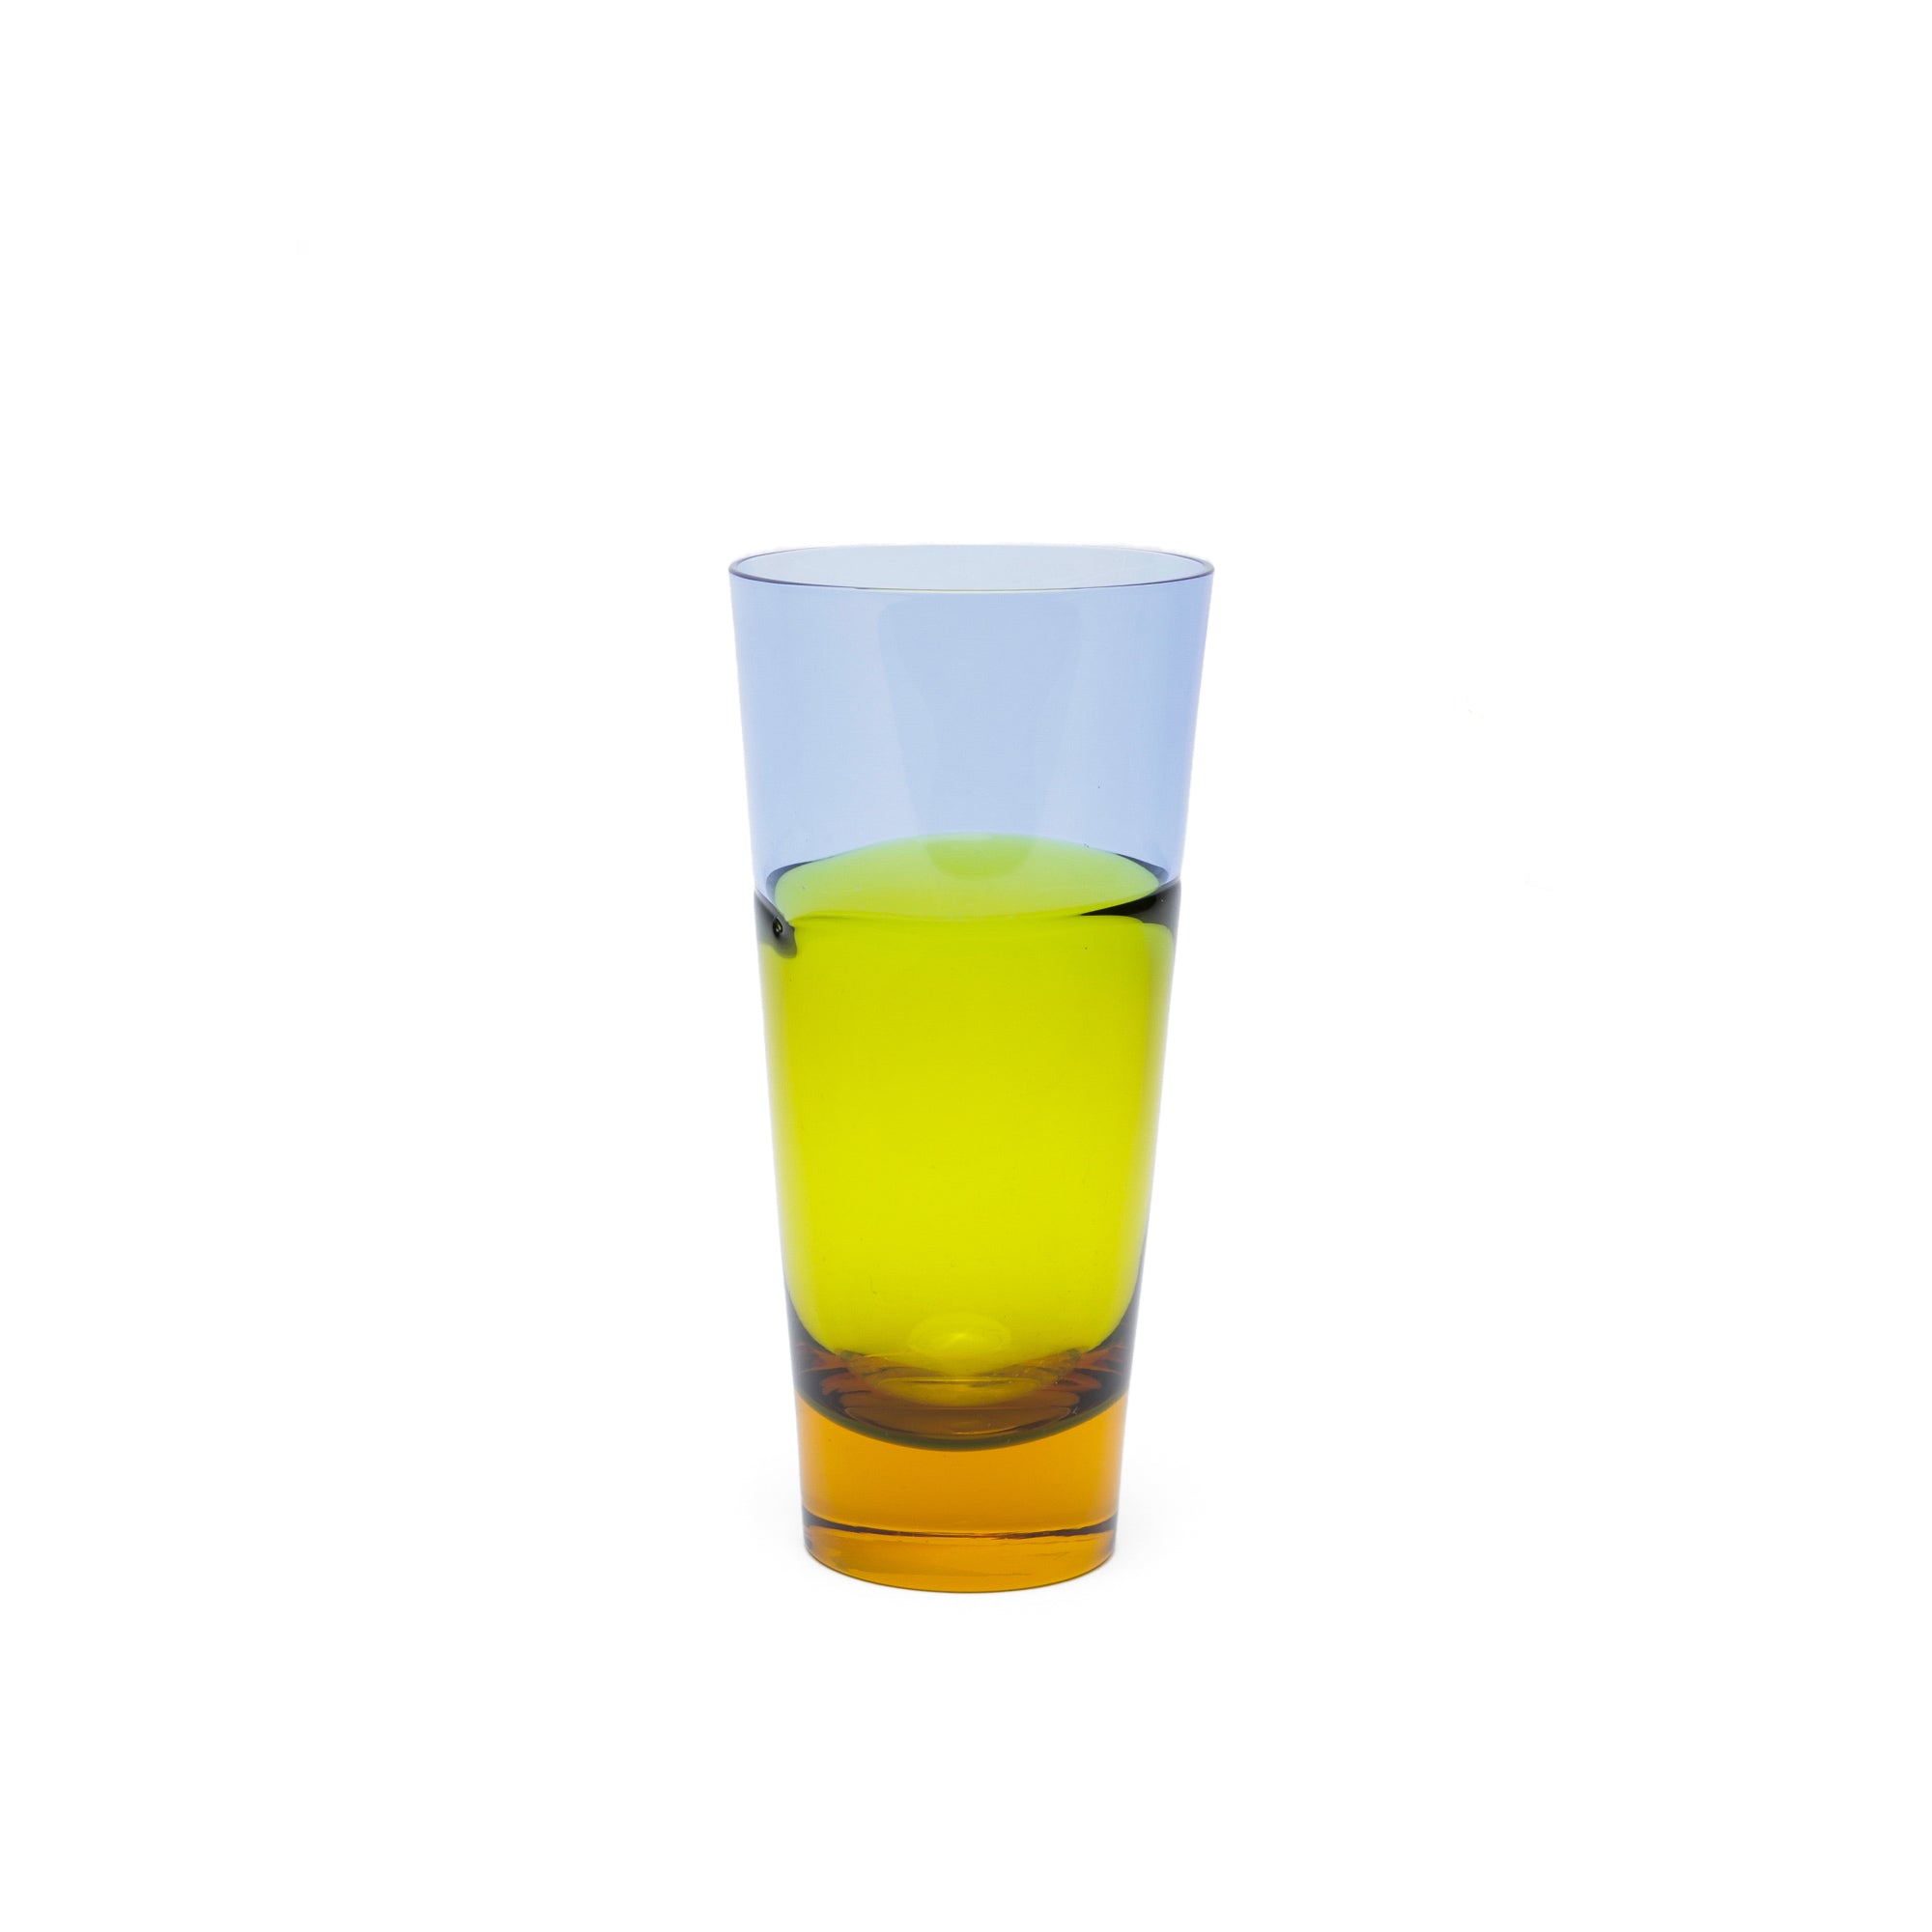 DUO - Tall Amber Glass, 10oz